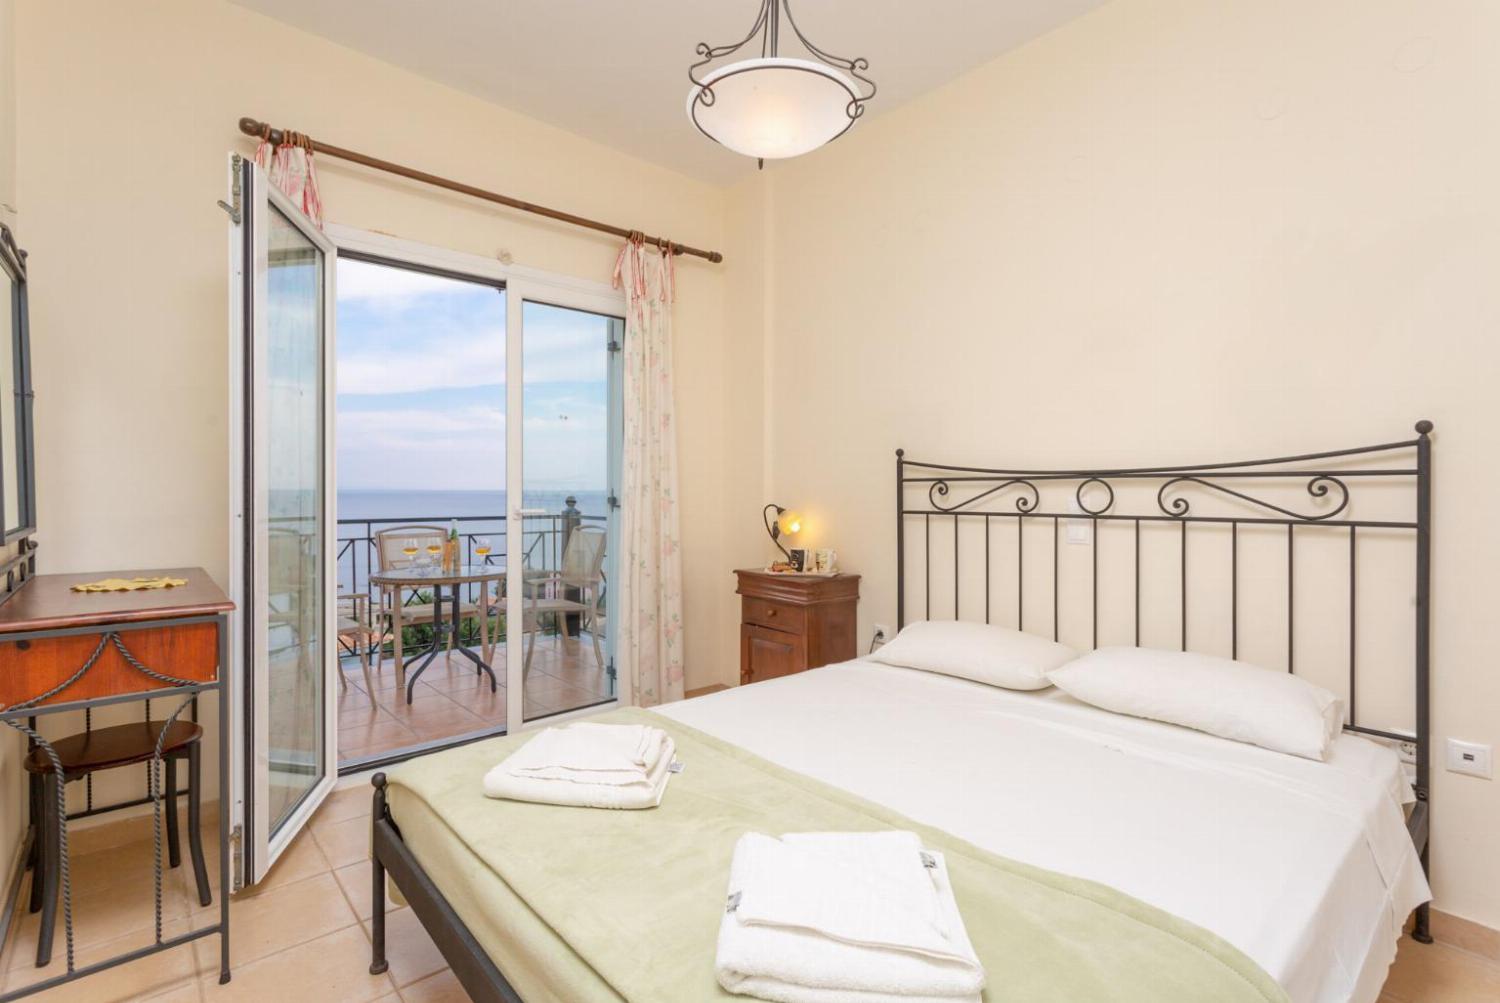 Double bedroom with A/C, and balcony access with sea views